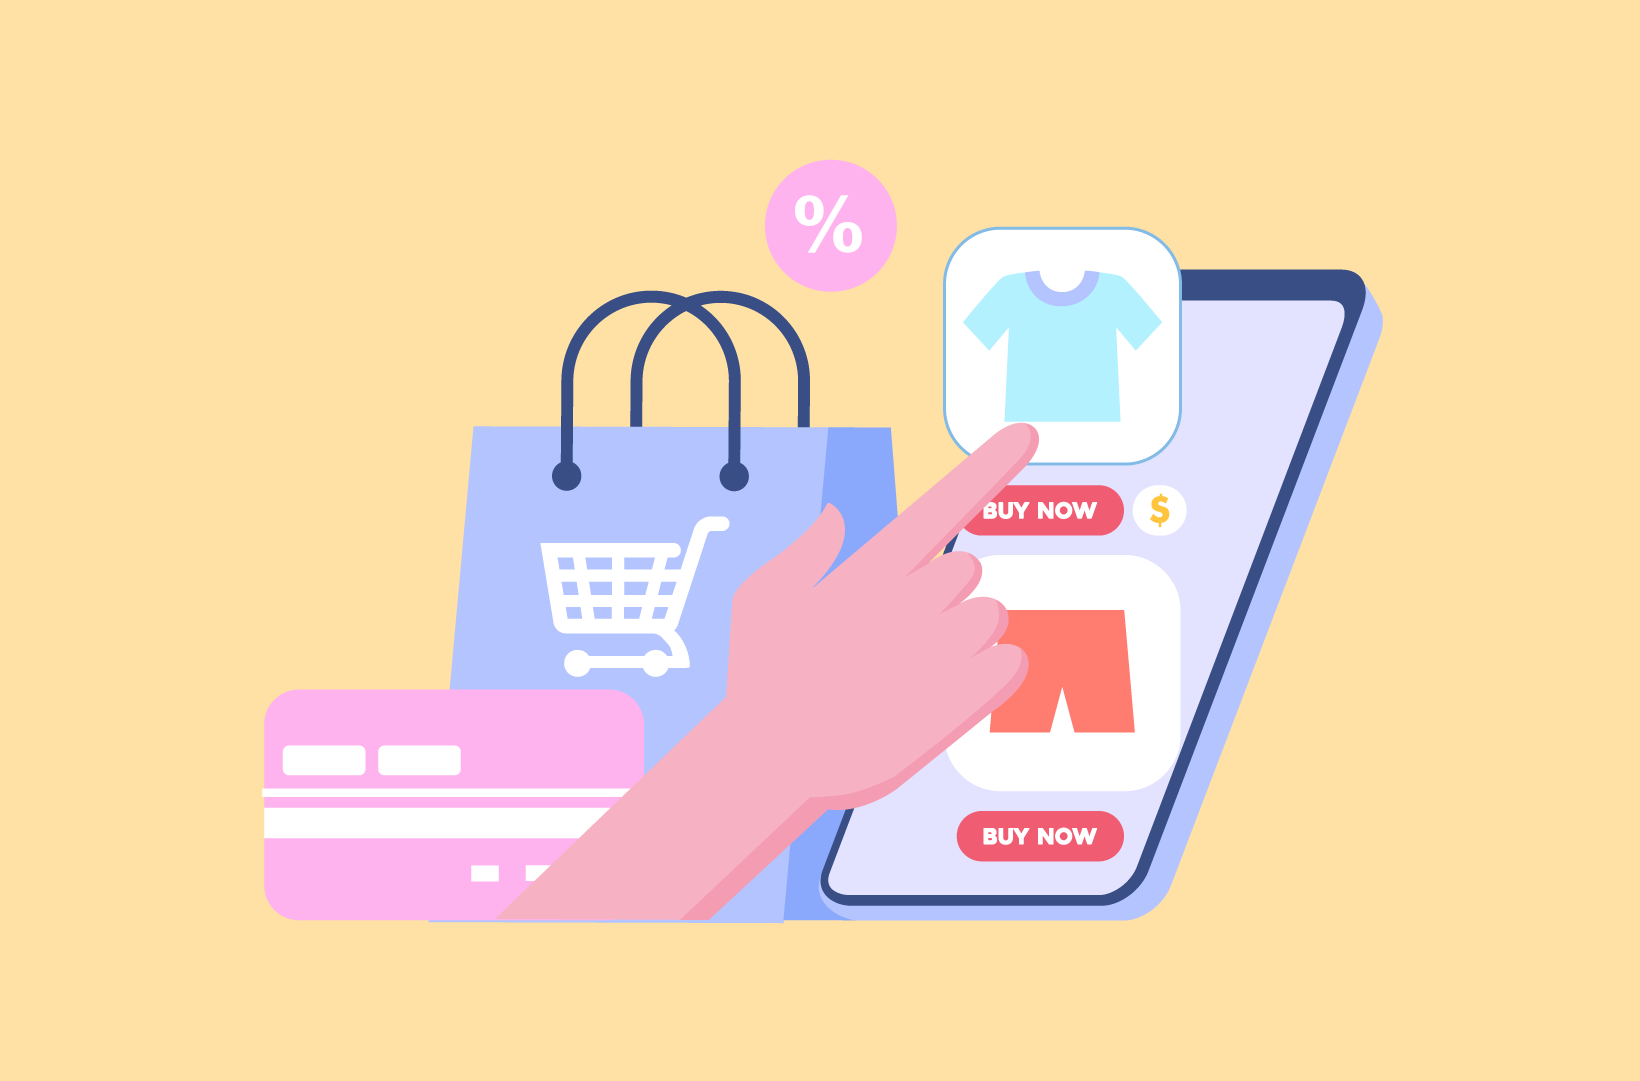 How to Set Up a Redirect after Checkout in WooCommerce